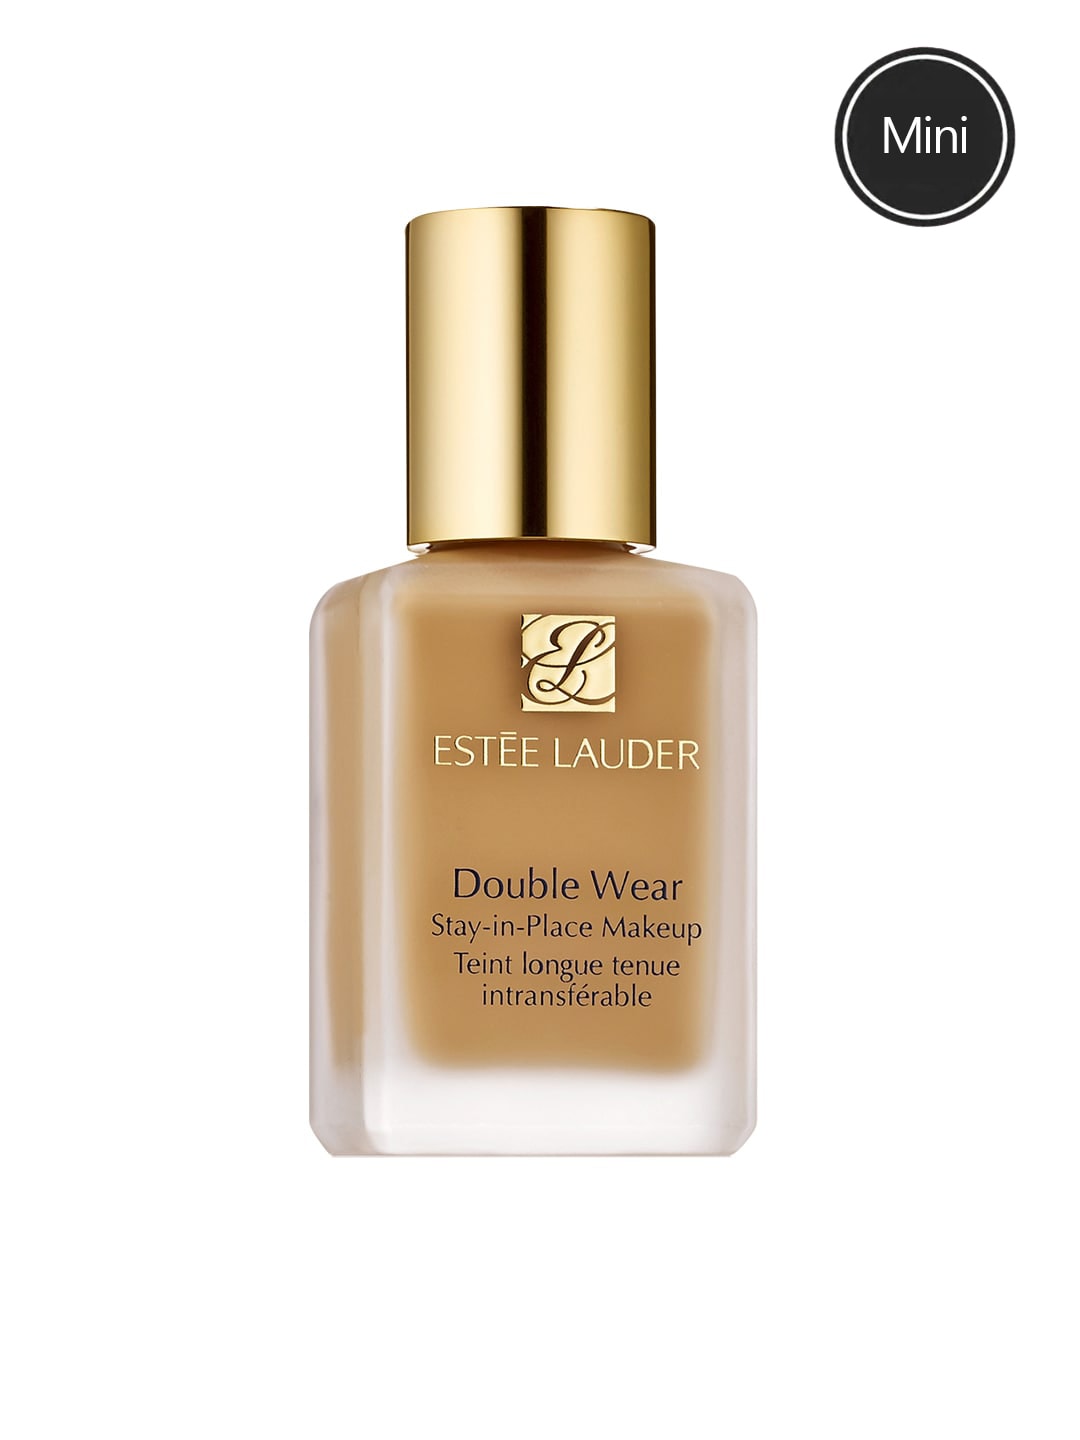 Estee Lauder Double Wear Stay-In-Place SPF 10 Makeup Liquid Foundation - Tawny 3W1 15 ml Price in India